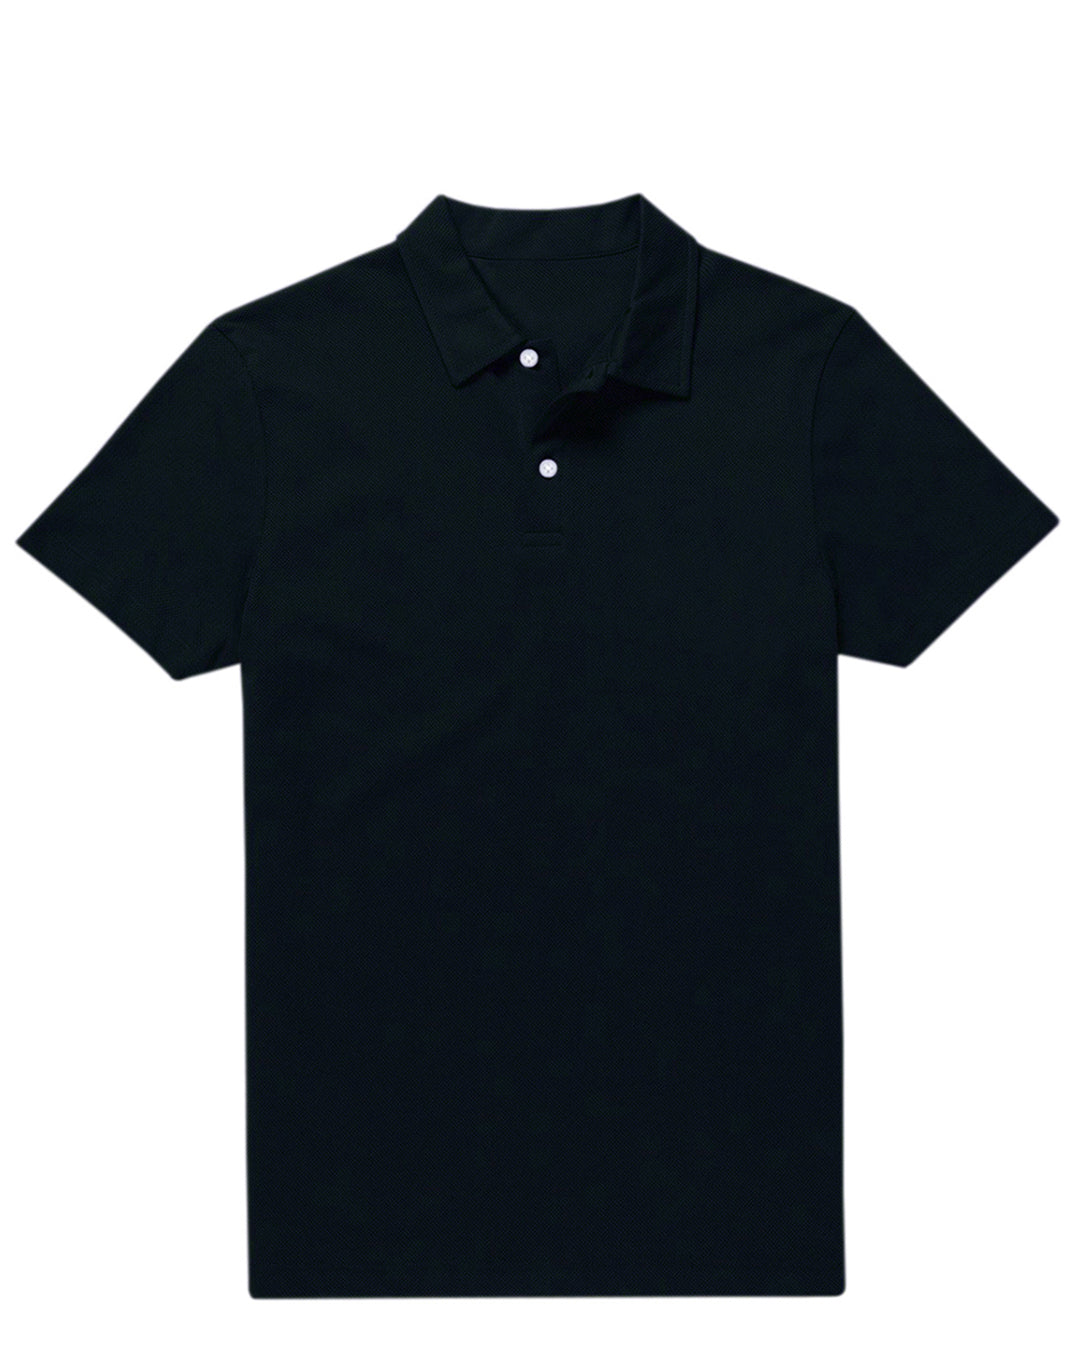 Front of the custom oxford polo shirt for men by Luxire in dark navy